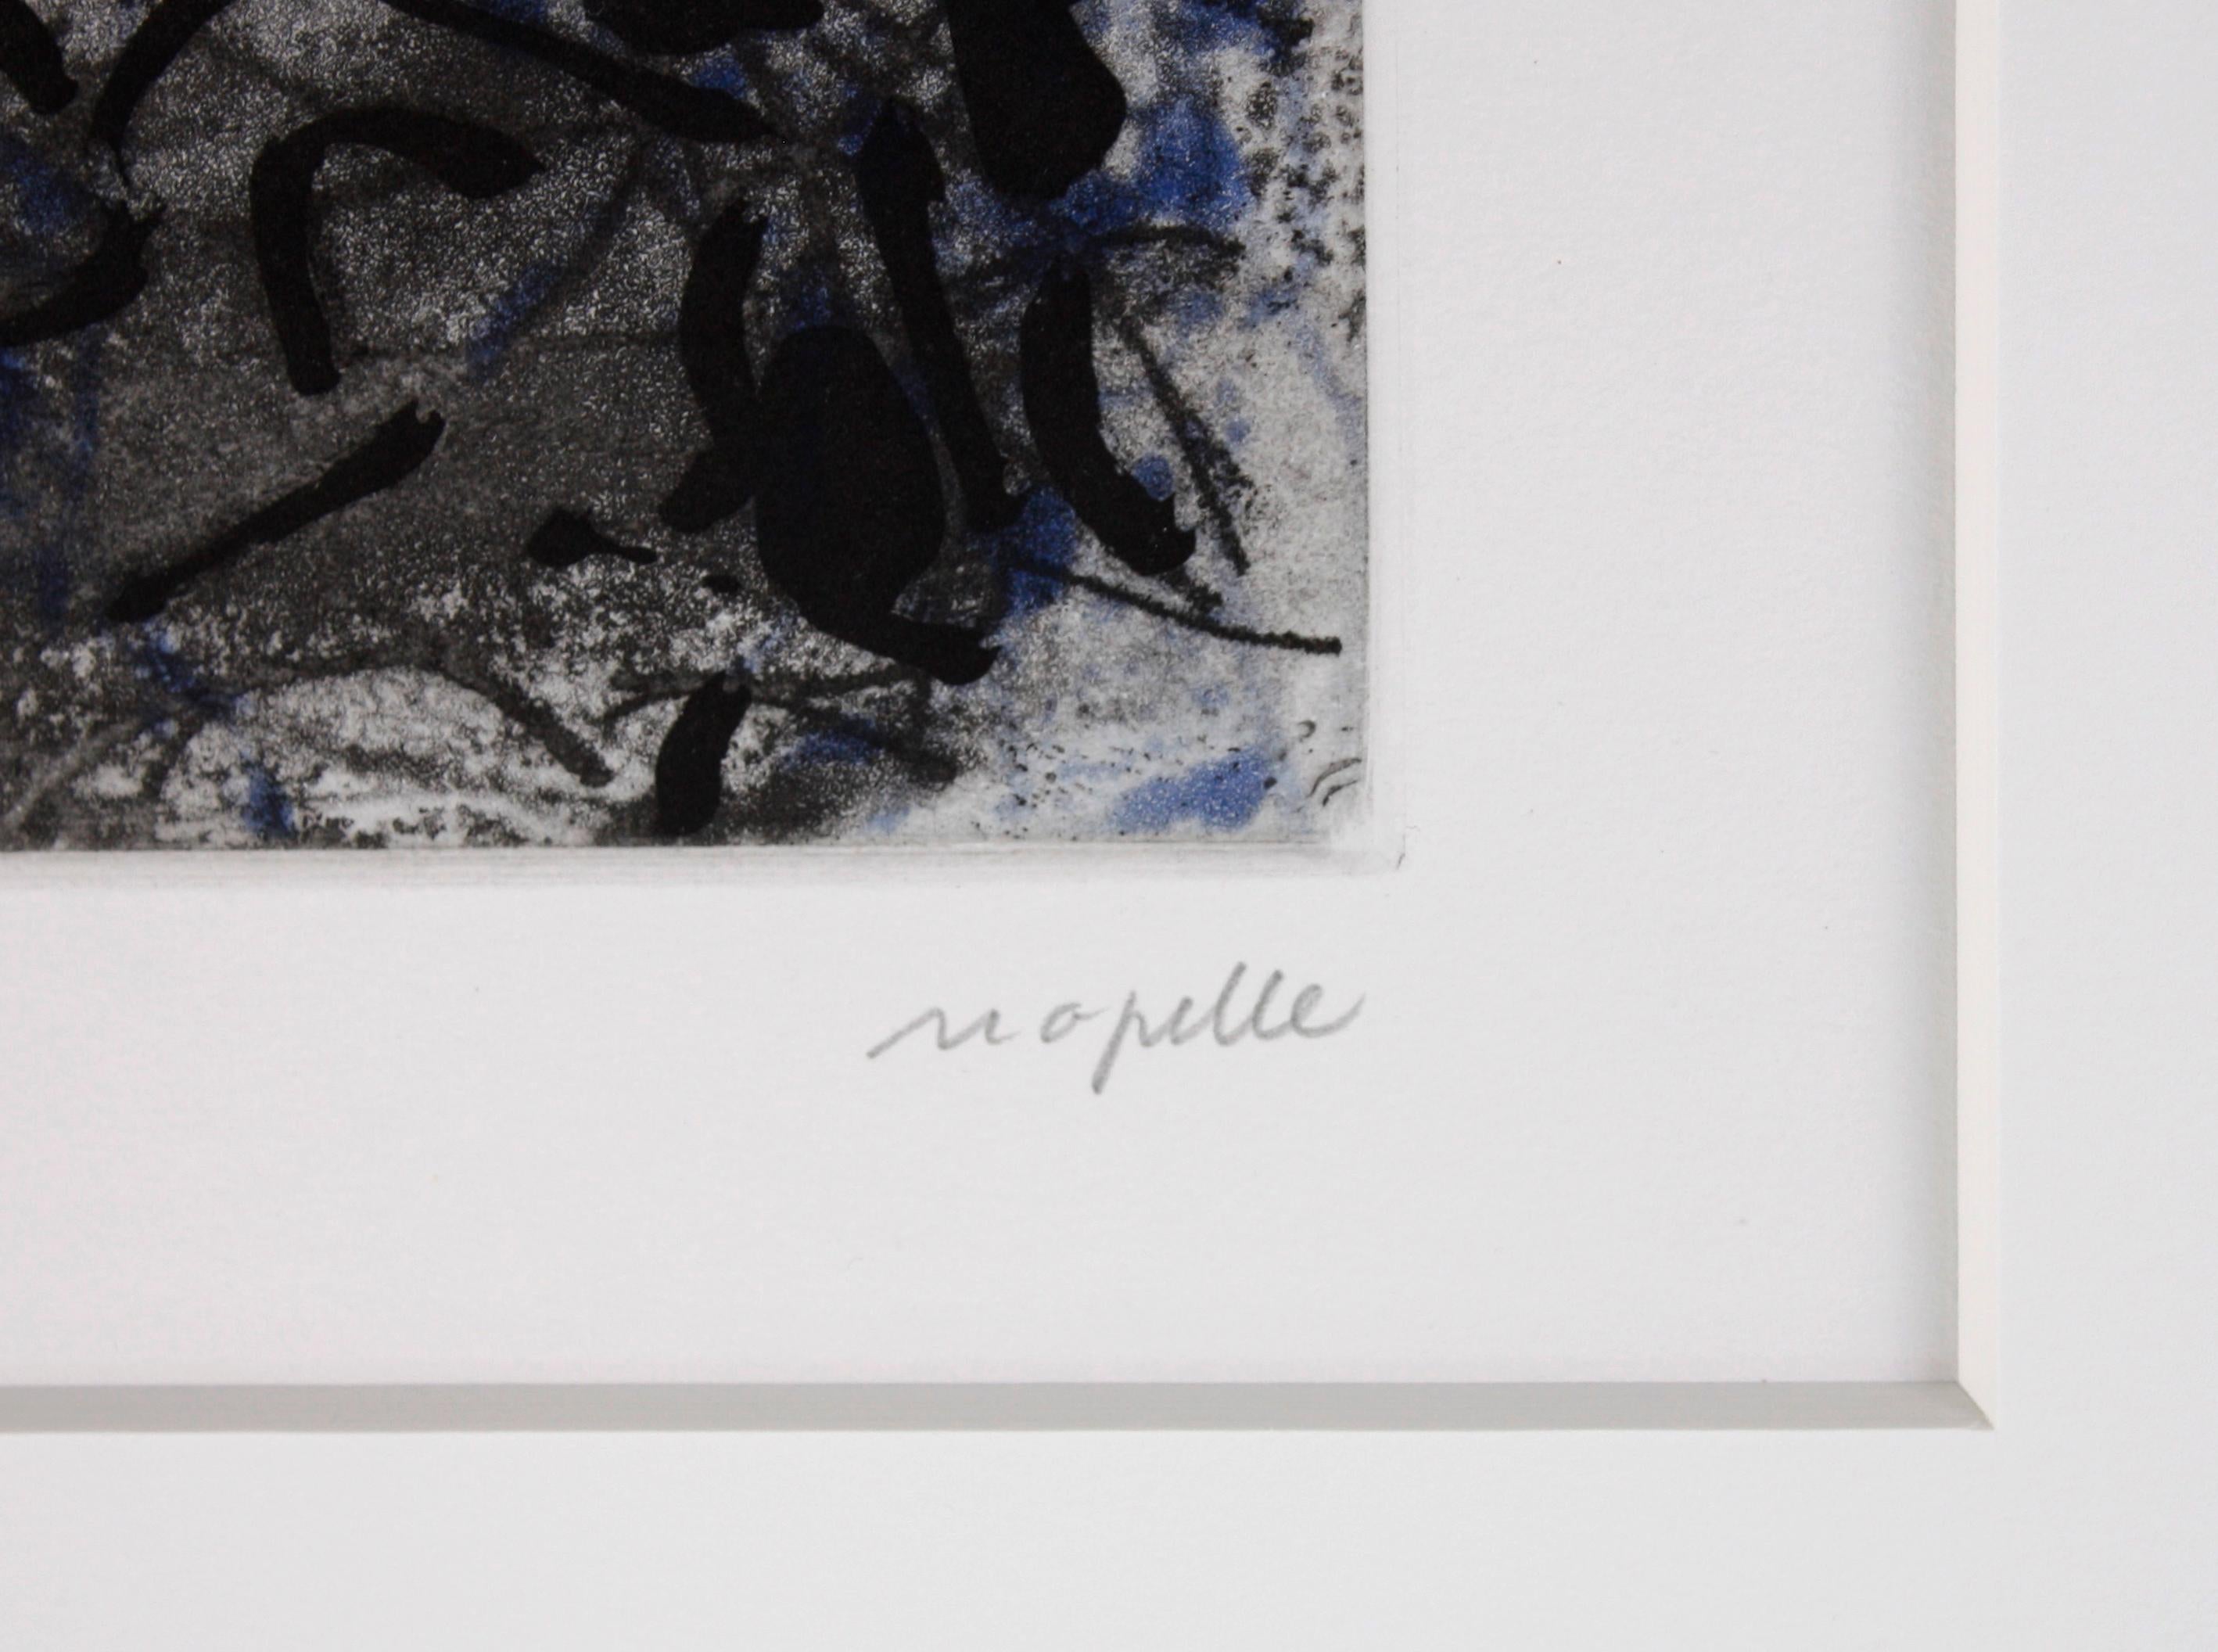 Original etching in colors on Rives paper. Edition of 56 out of 75. Printed by Maeght Publisher, Paris. Listed in the catalogue raisonné of Jean-Paul Riopelle, # 1967.17EST.GR, page 152. Signed lower right.